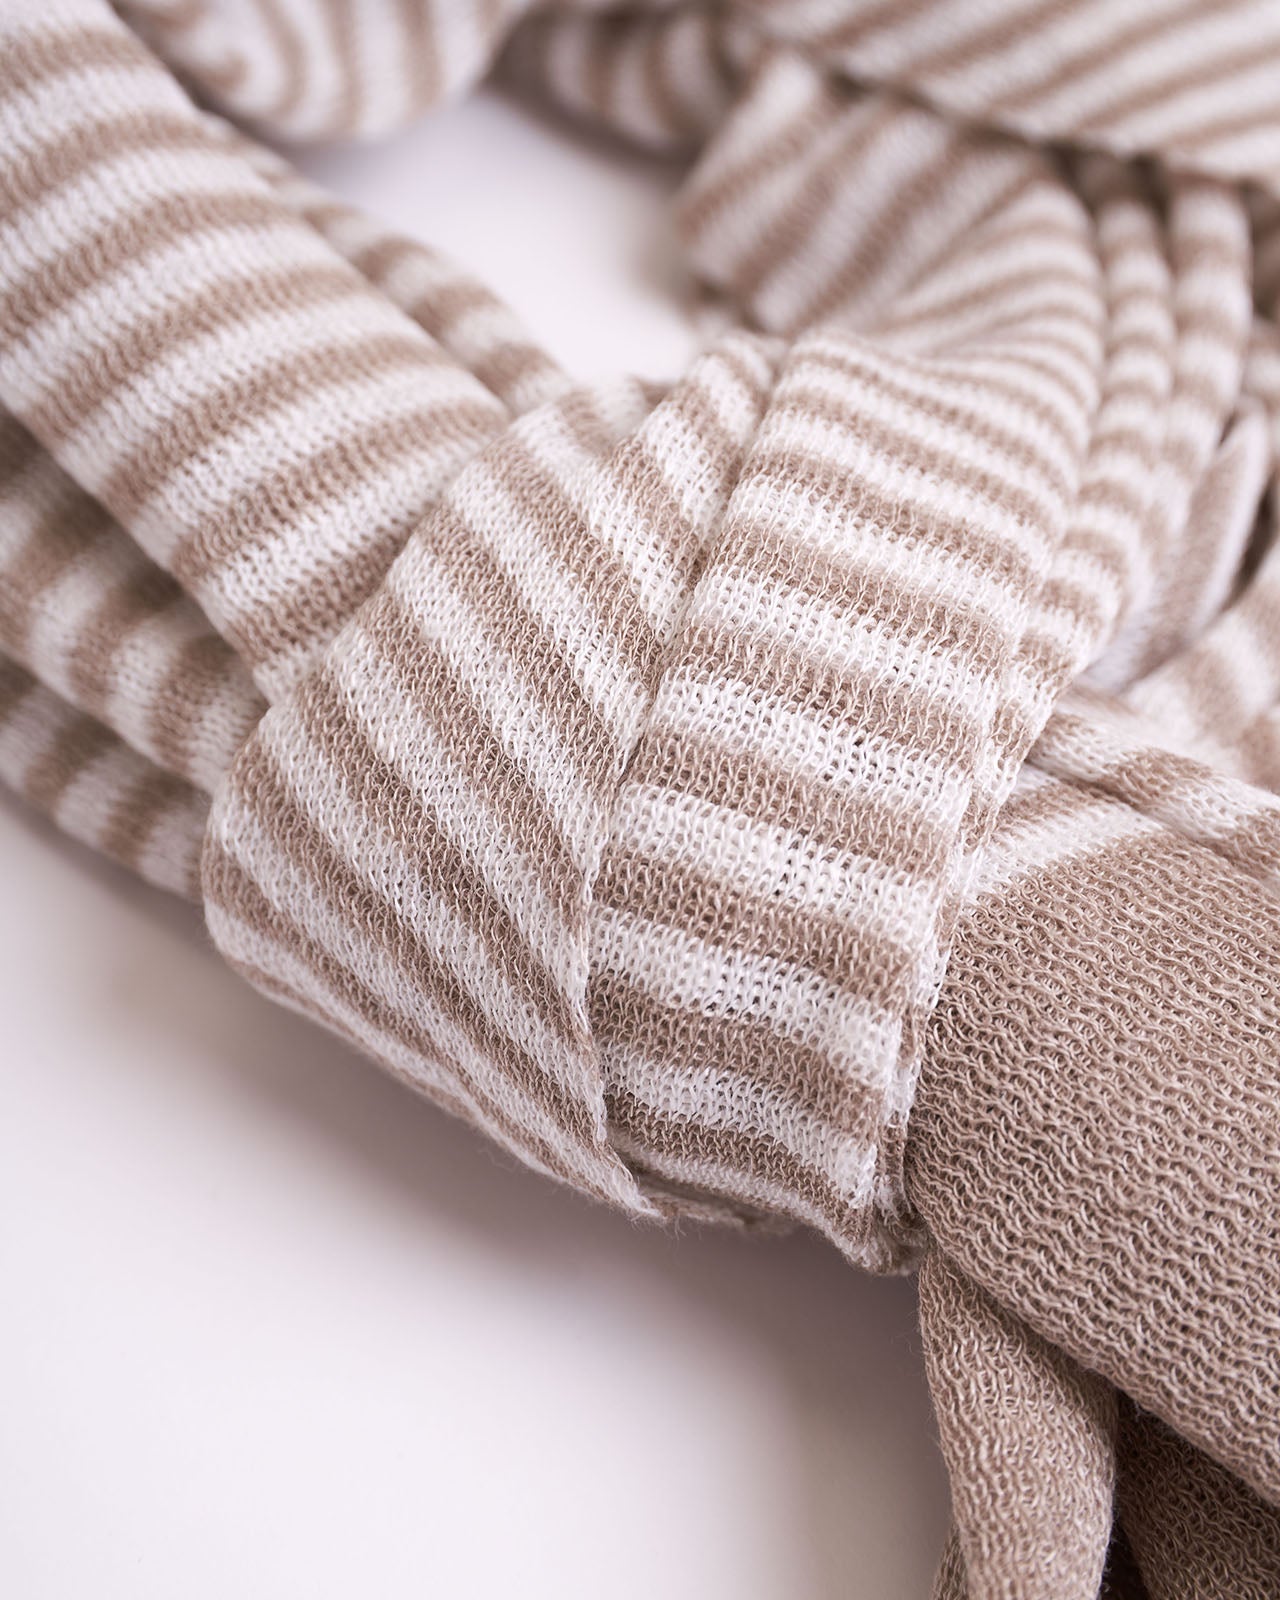 Soft textured linen scarf arranged in a loose knot, featuring a delicate beige and white striped pattern with subtle textural details. The ends of the scarf have a frayed, fuzzy finish, adding a casual yet elegant touch. The scarf is displayed against a white background, highlighting its cozy and inviting appearance